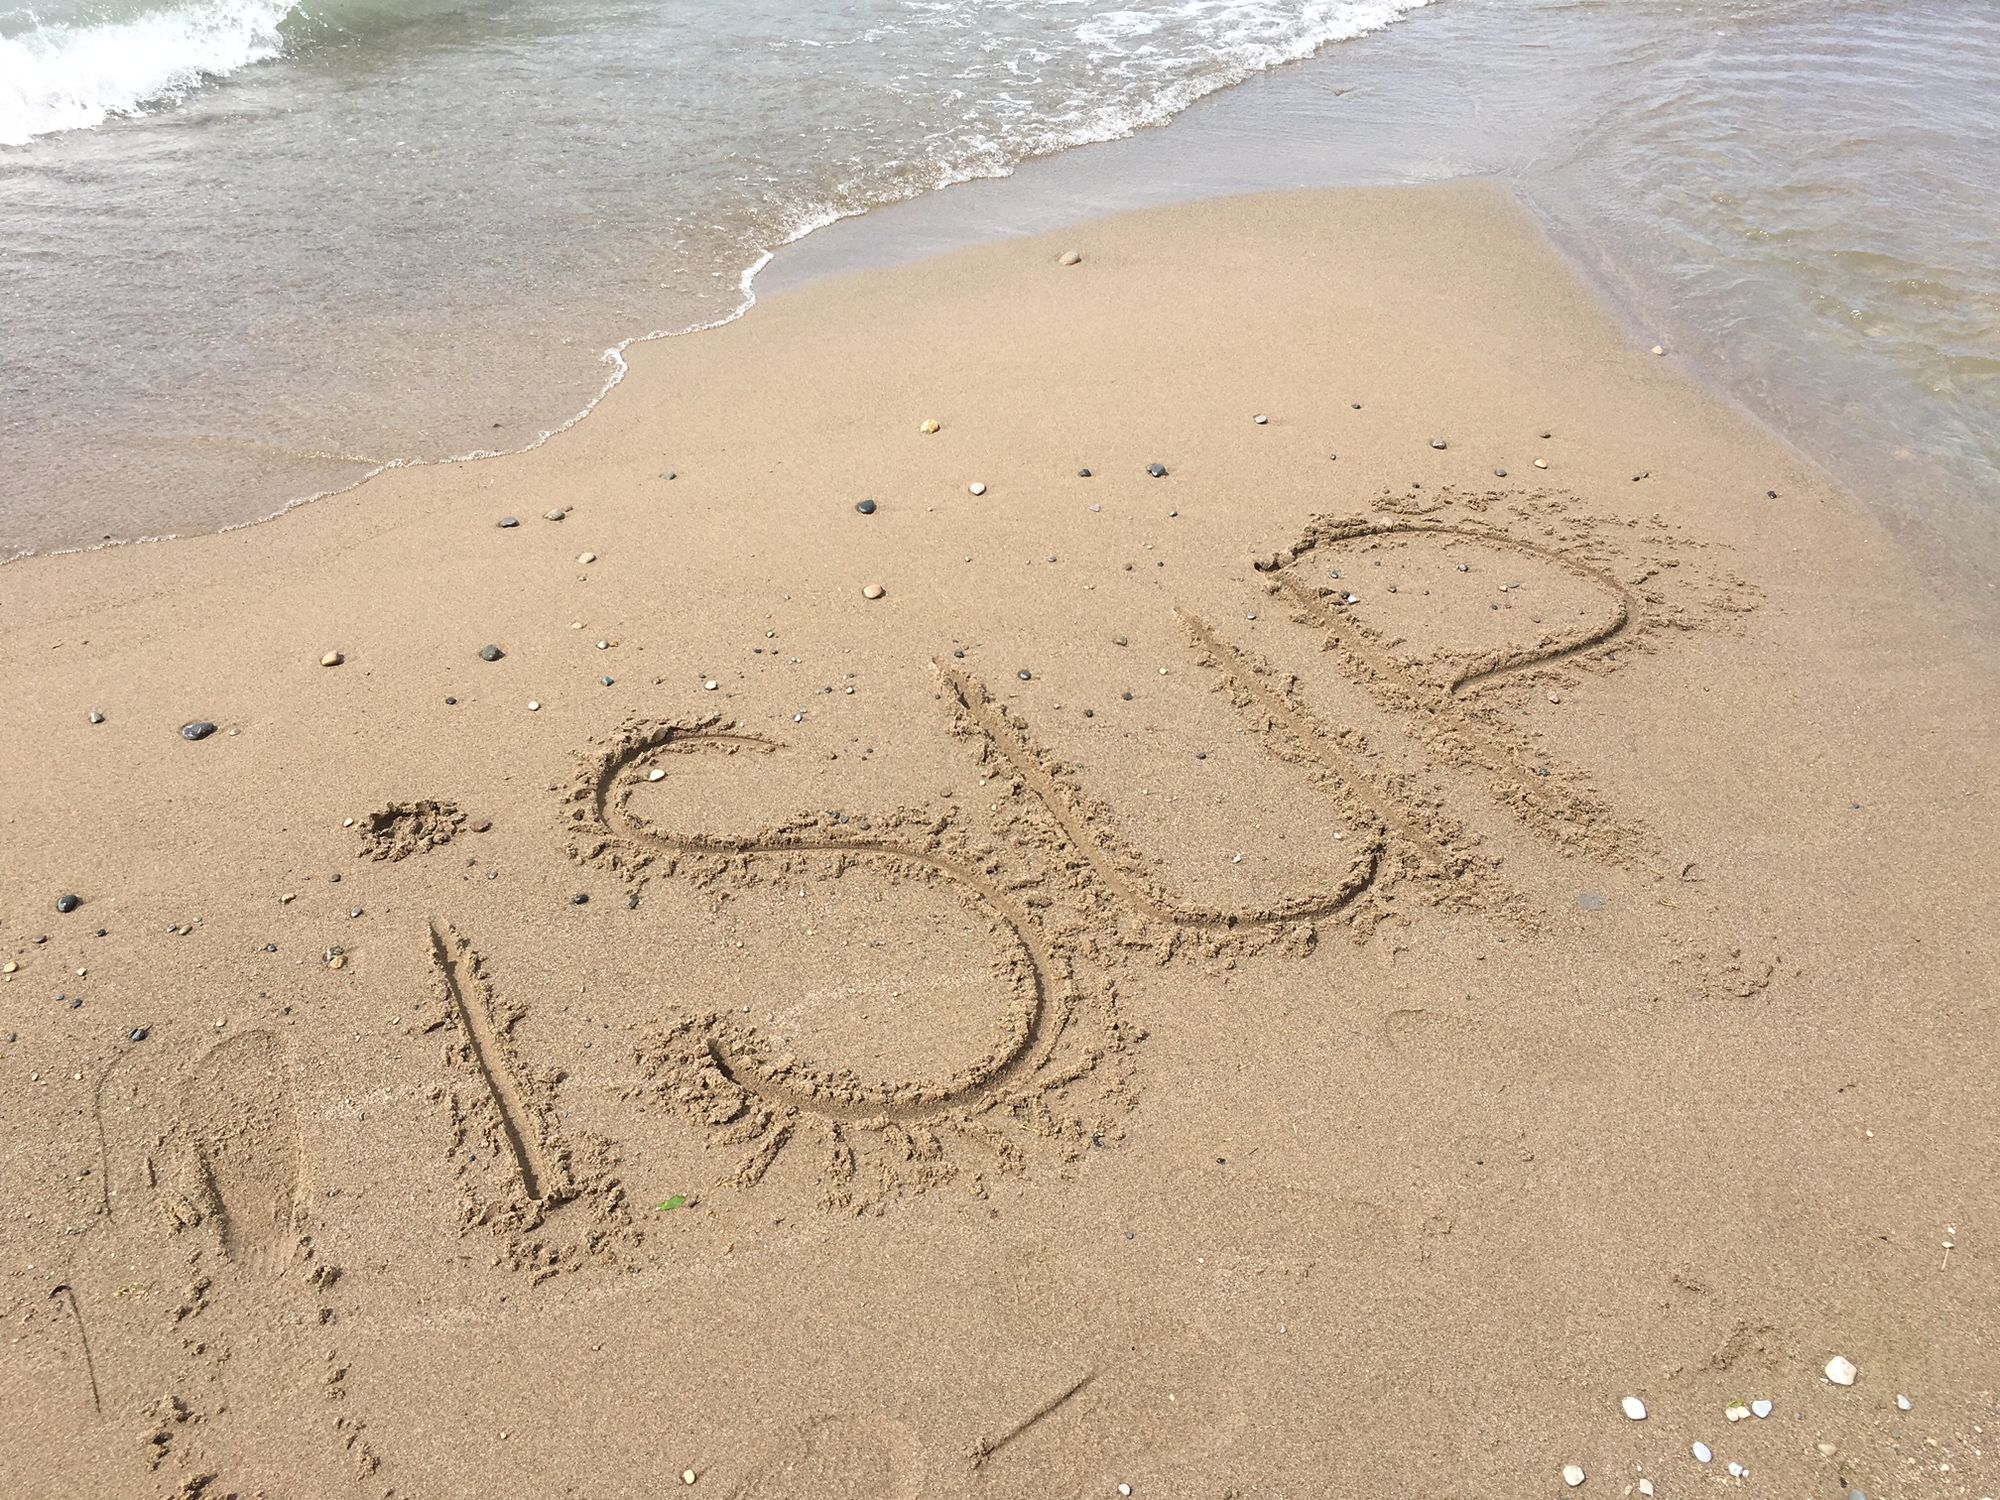 iSUP written in the sand at the beach